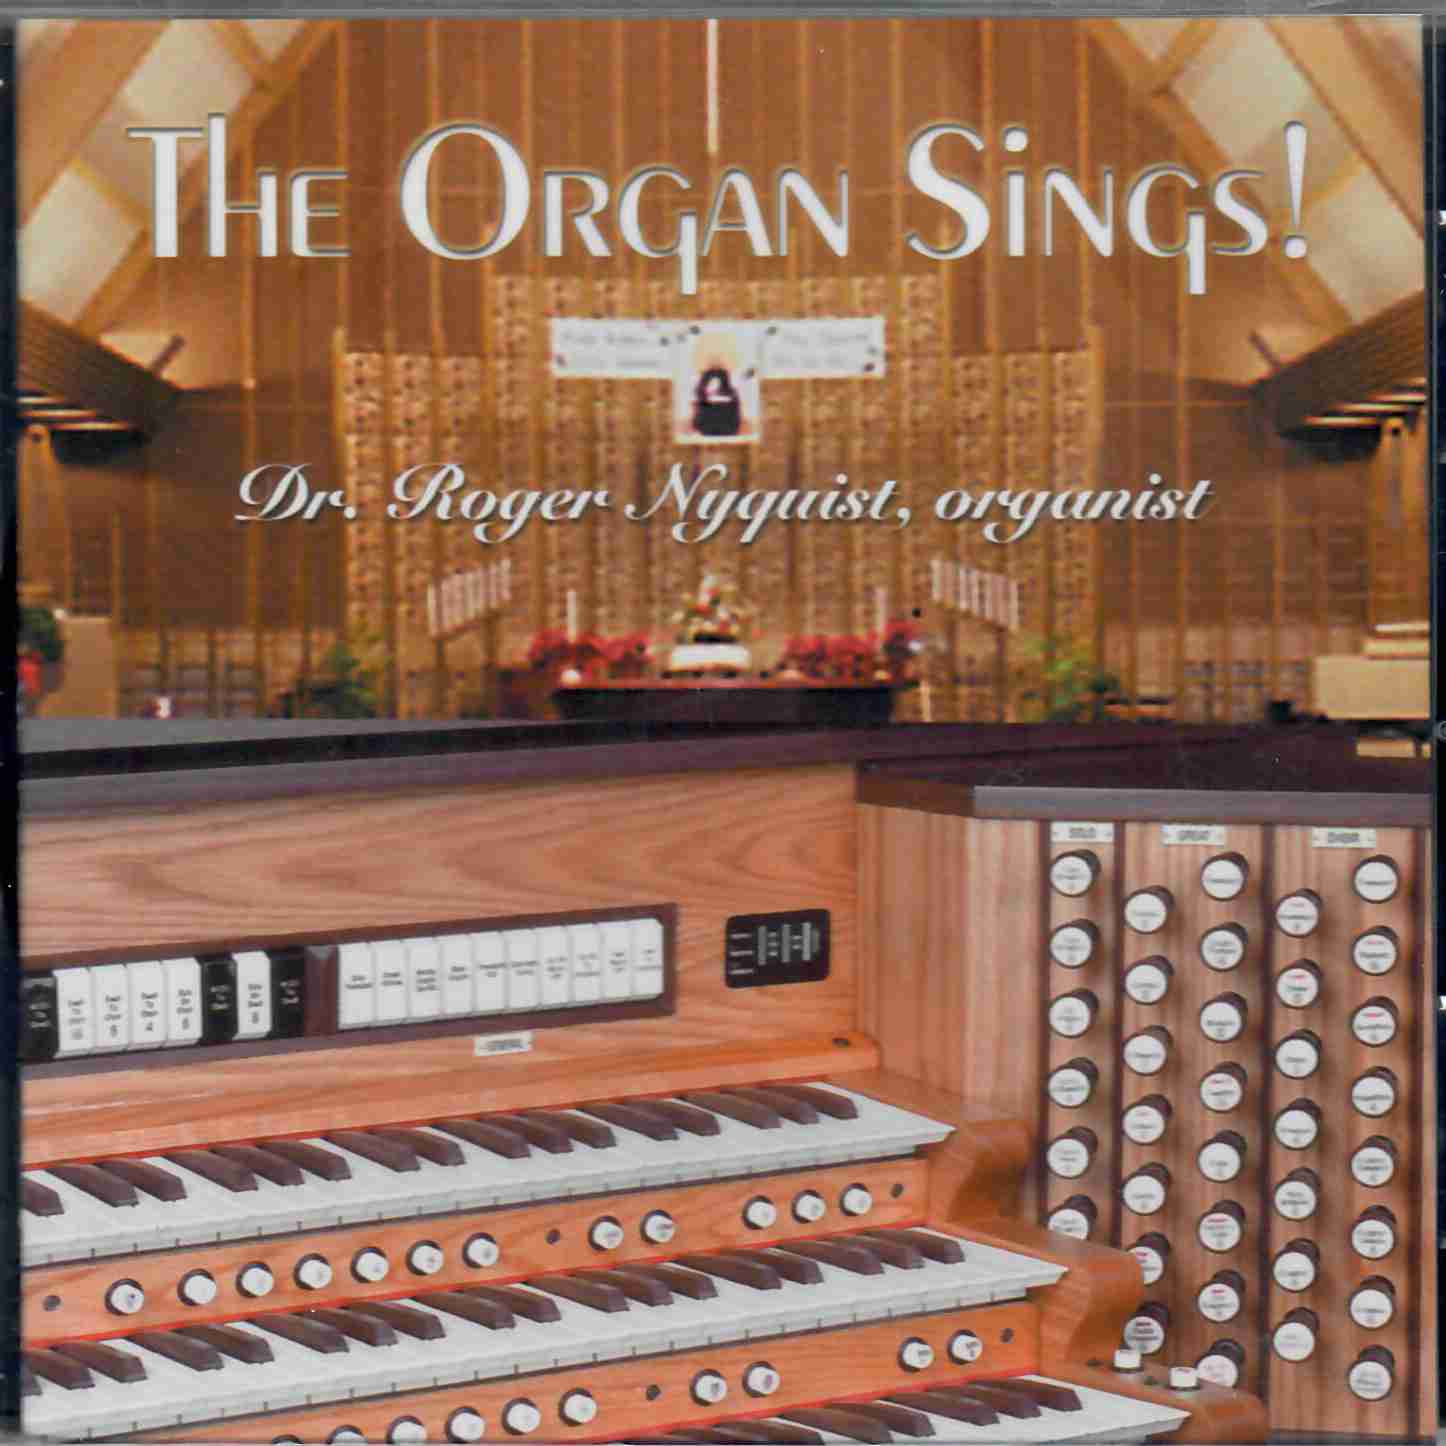 Dr Roger Nyquist: The Organ Sings.